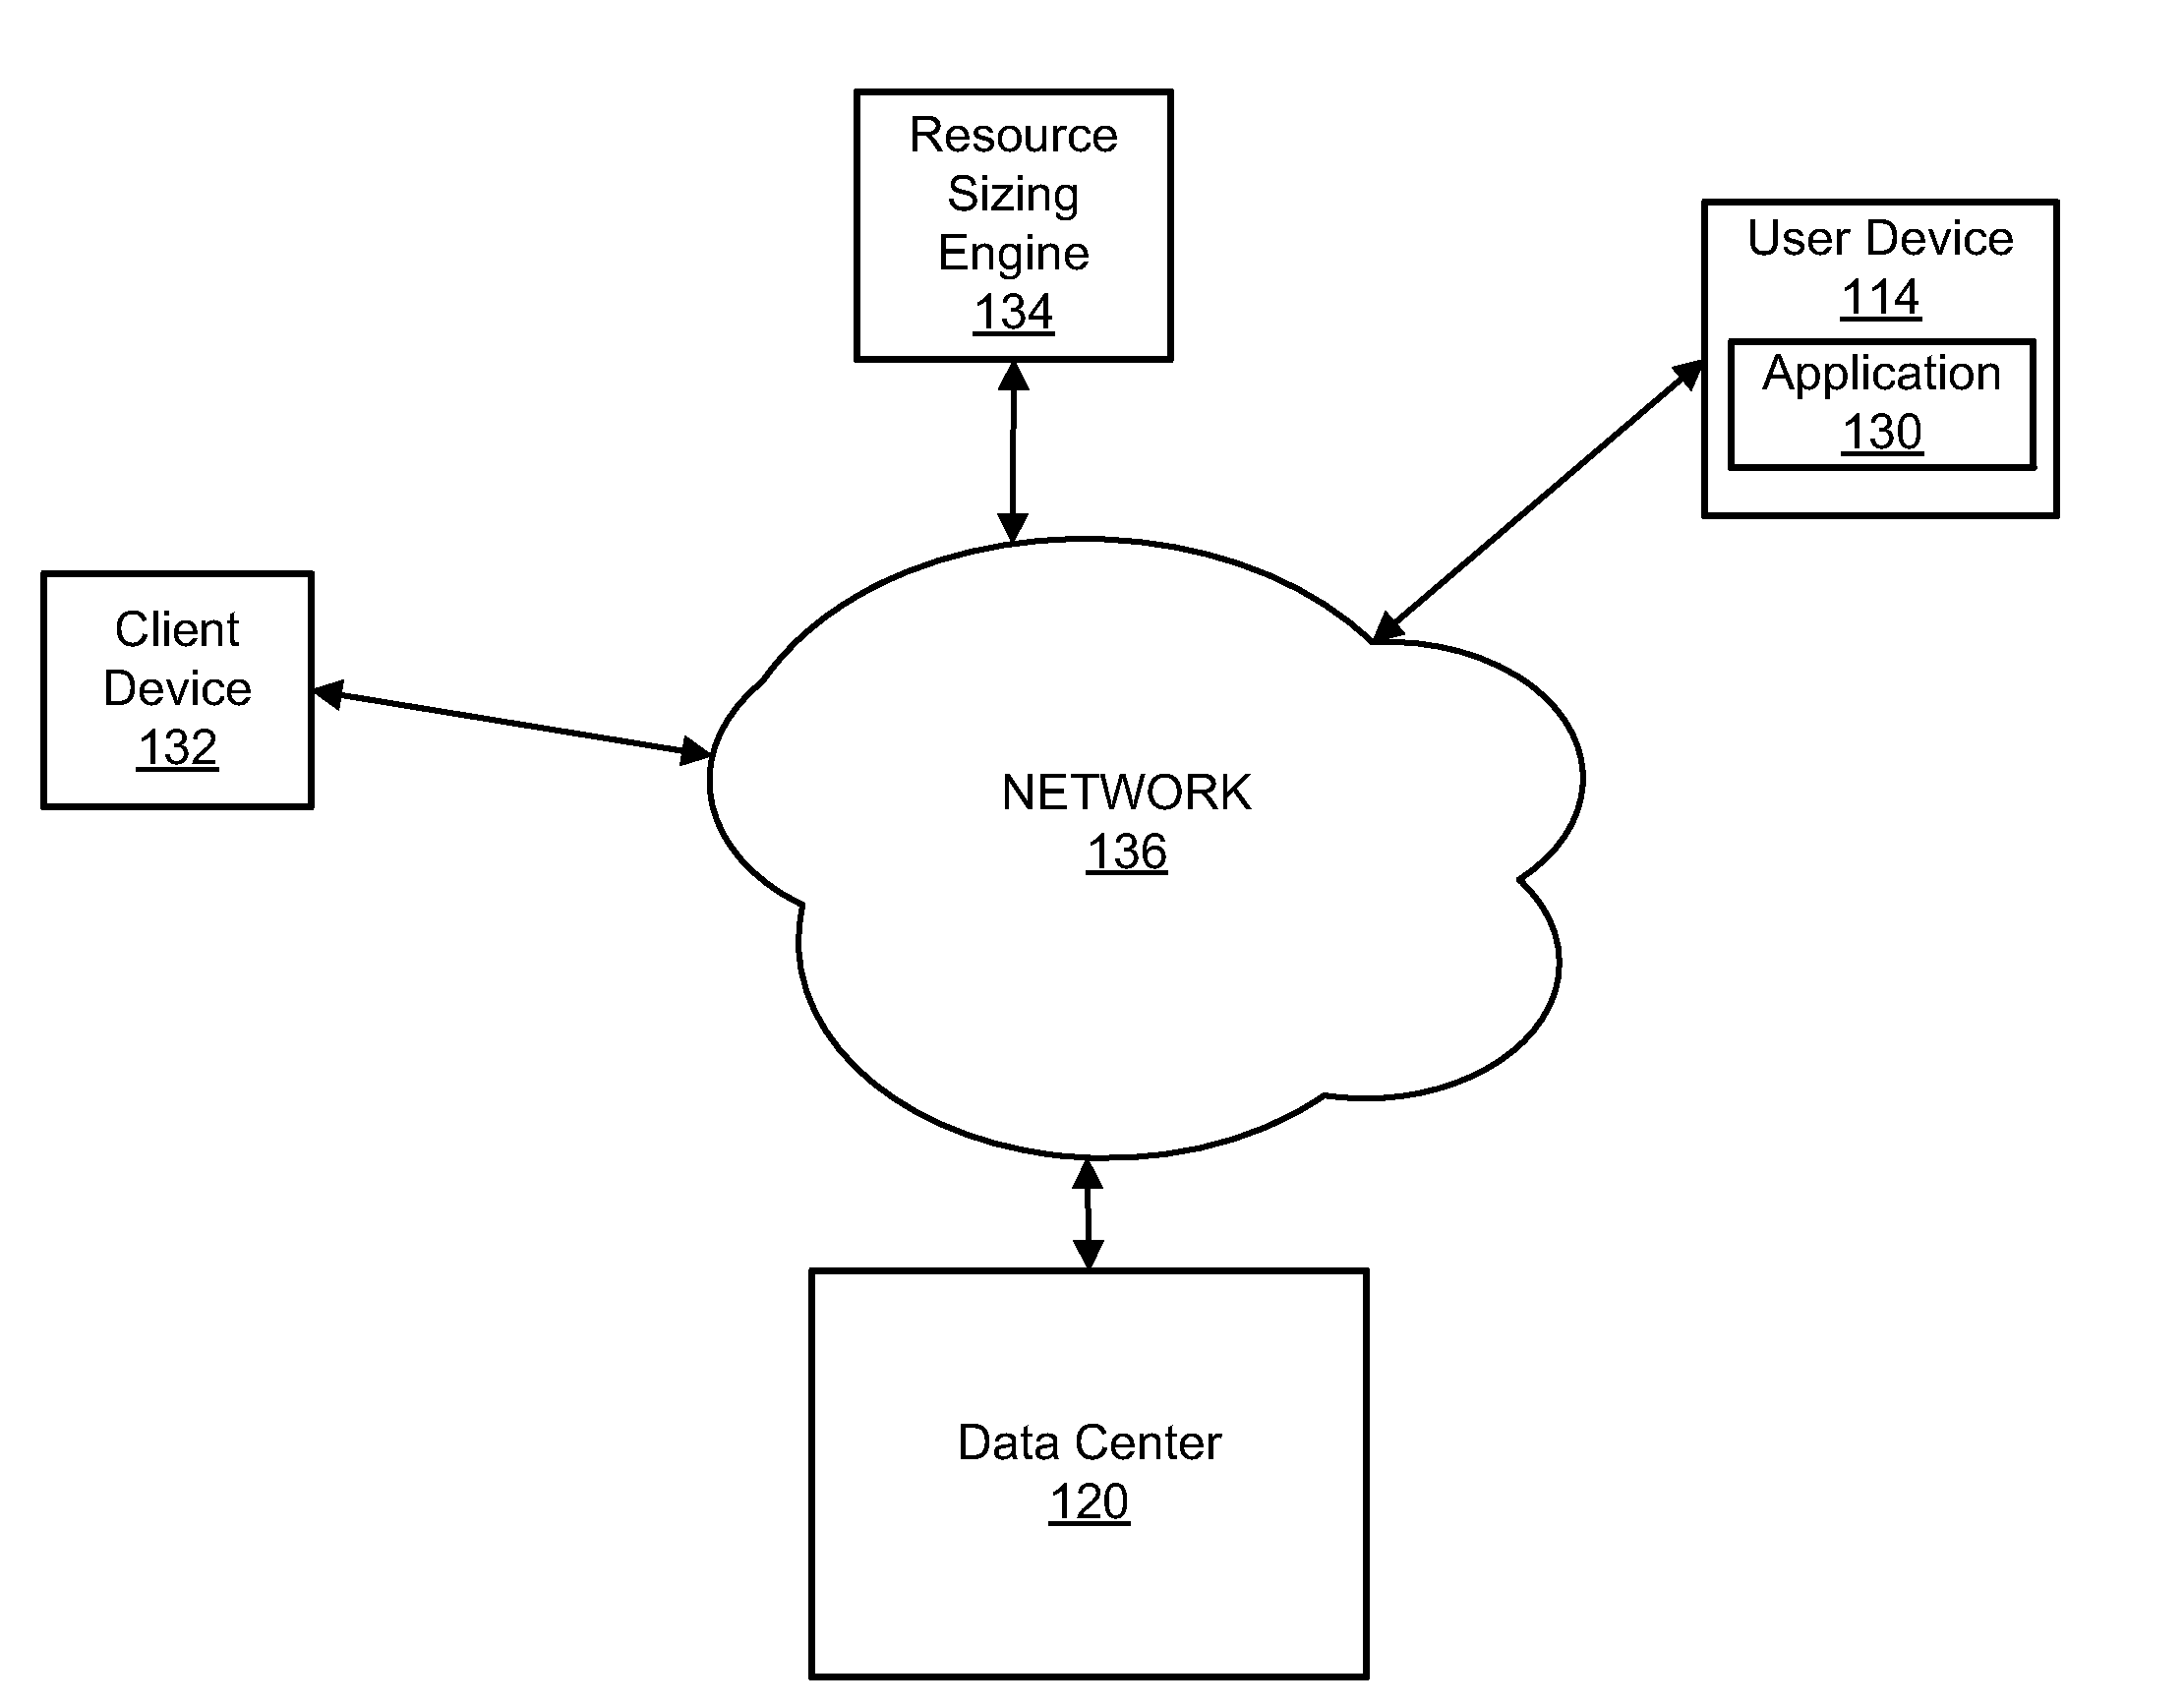 Systems and methods for sizing resources in a cloud-based environment